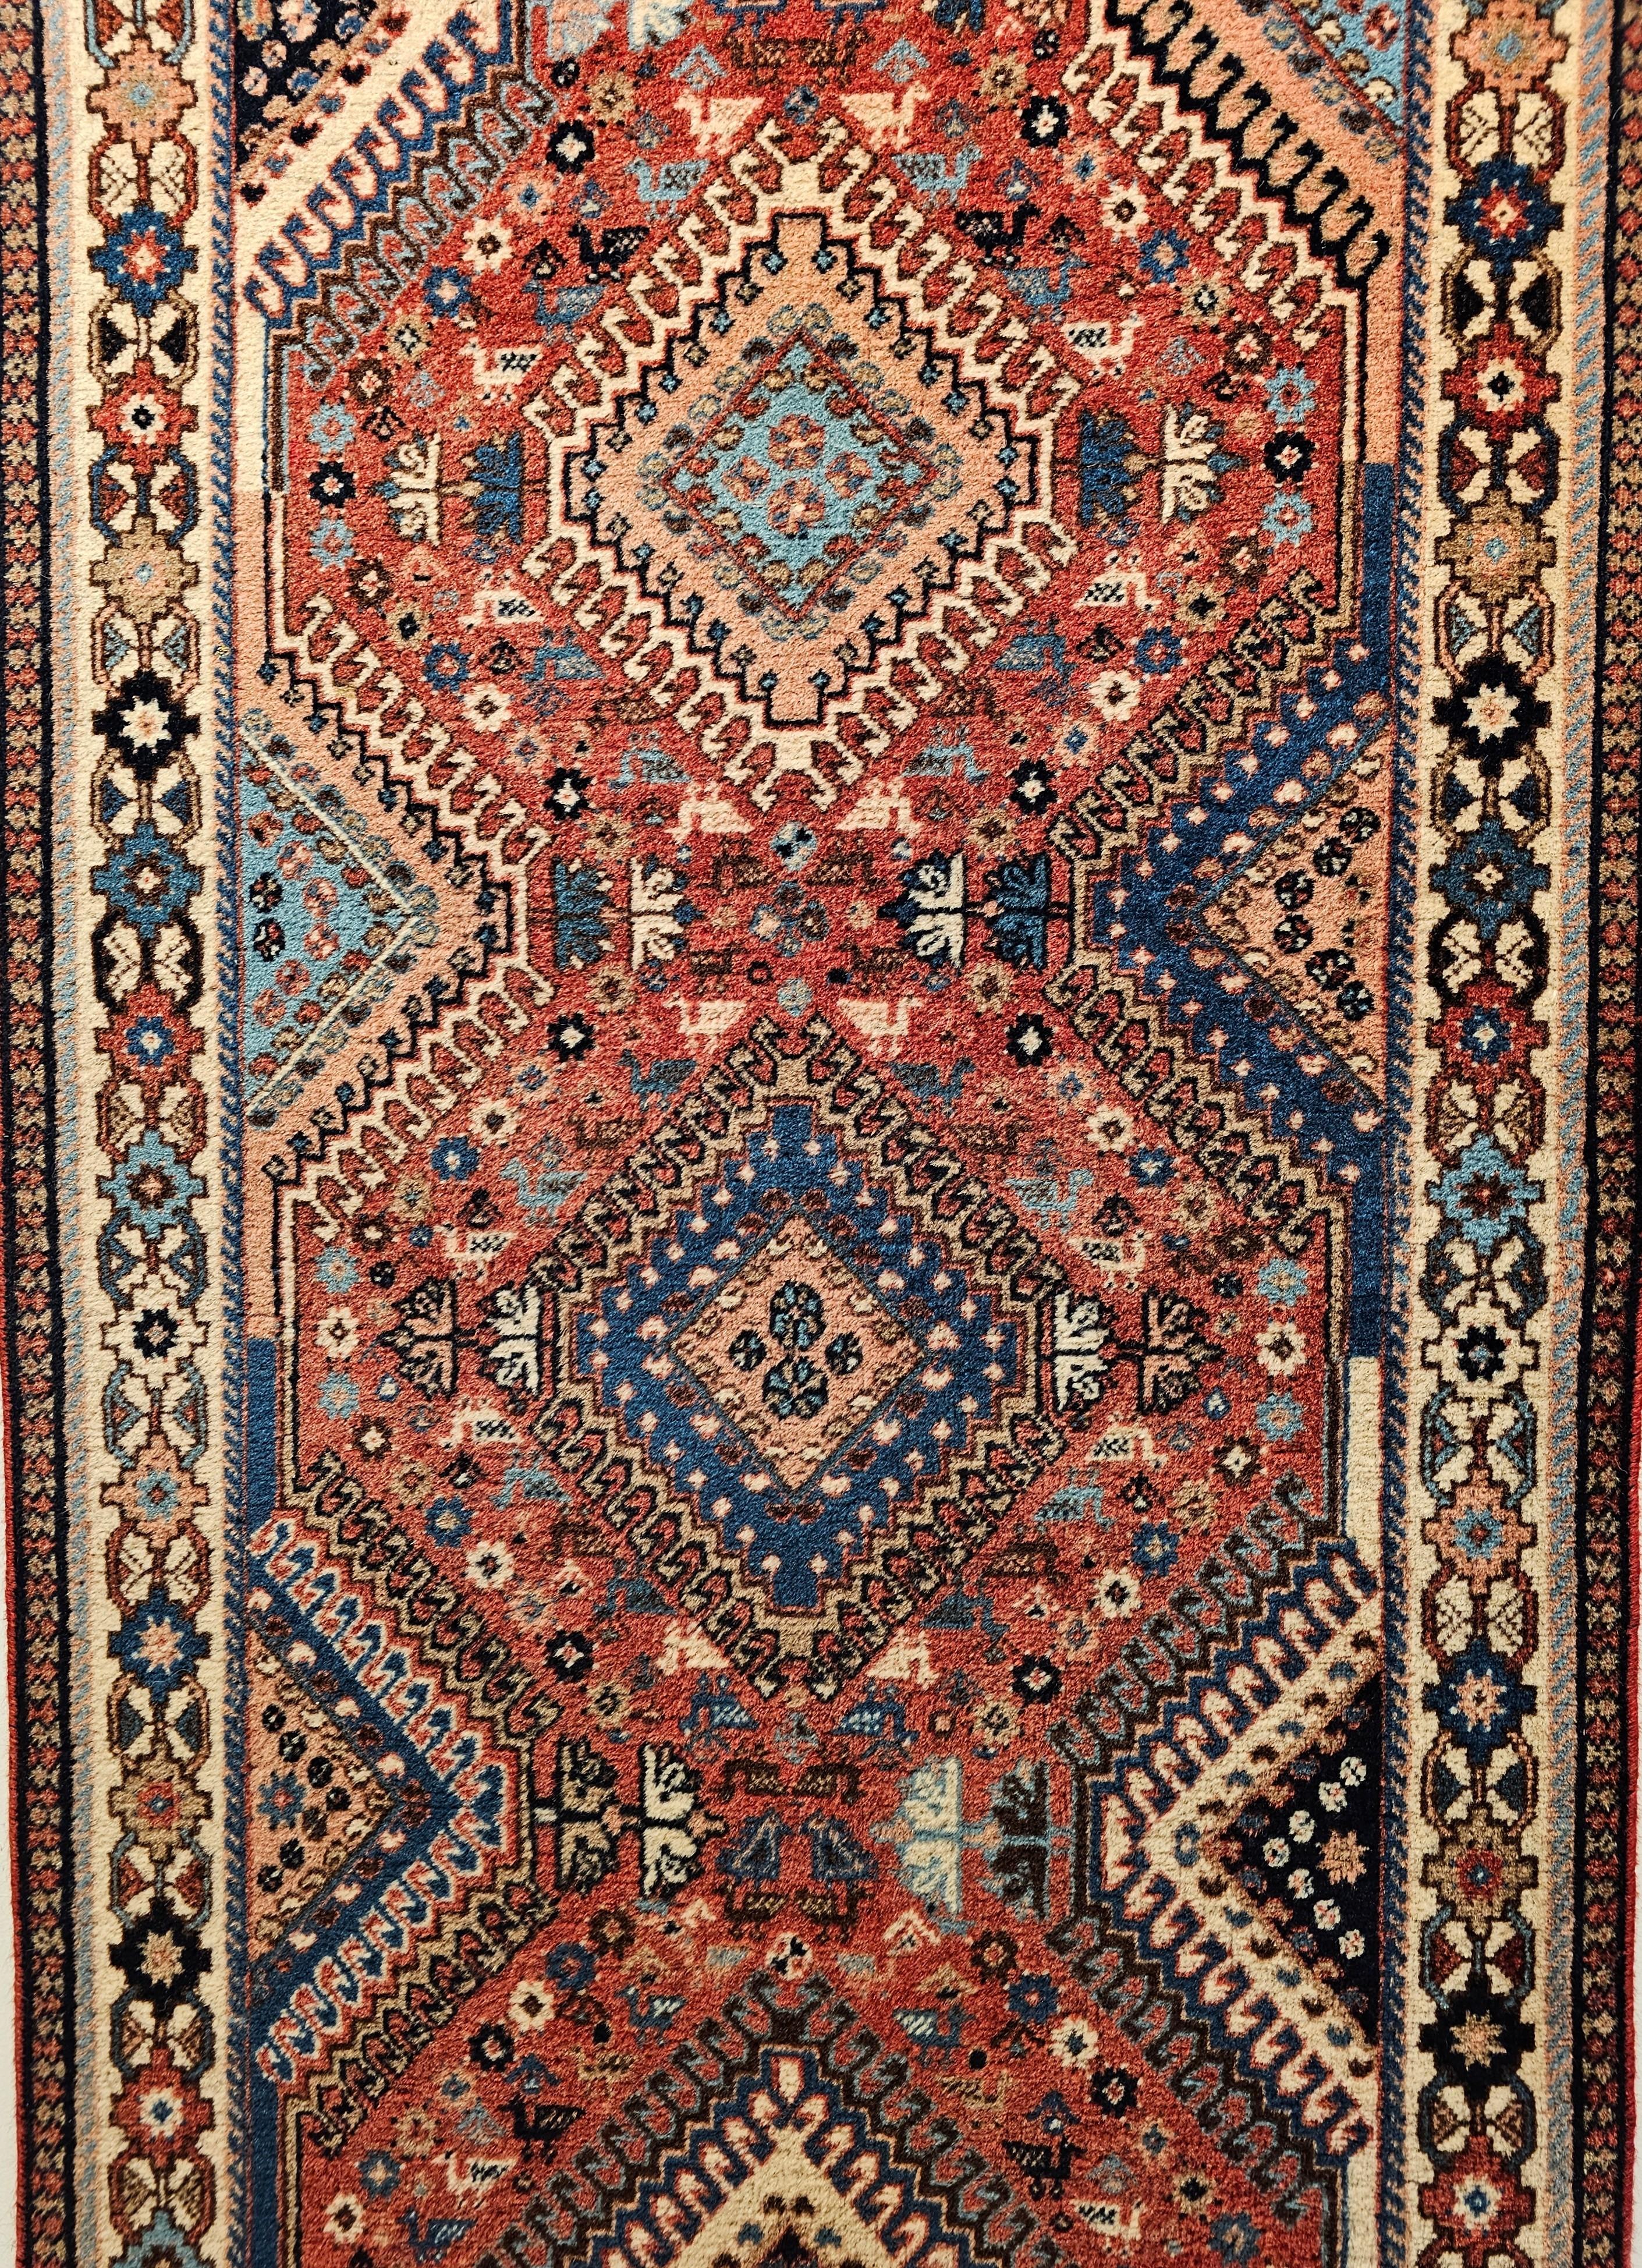 A beautiful vintage Persian Shiraz Yalameh tribal runner in a geometric allover pattern in red, ivory, and blue colors.  The design consists of a single column of connected latch hook medallions in bright colors of yellow, and red set on a French